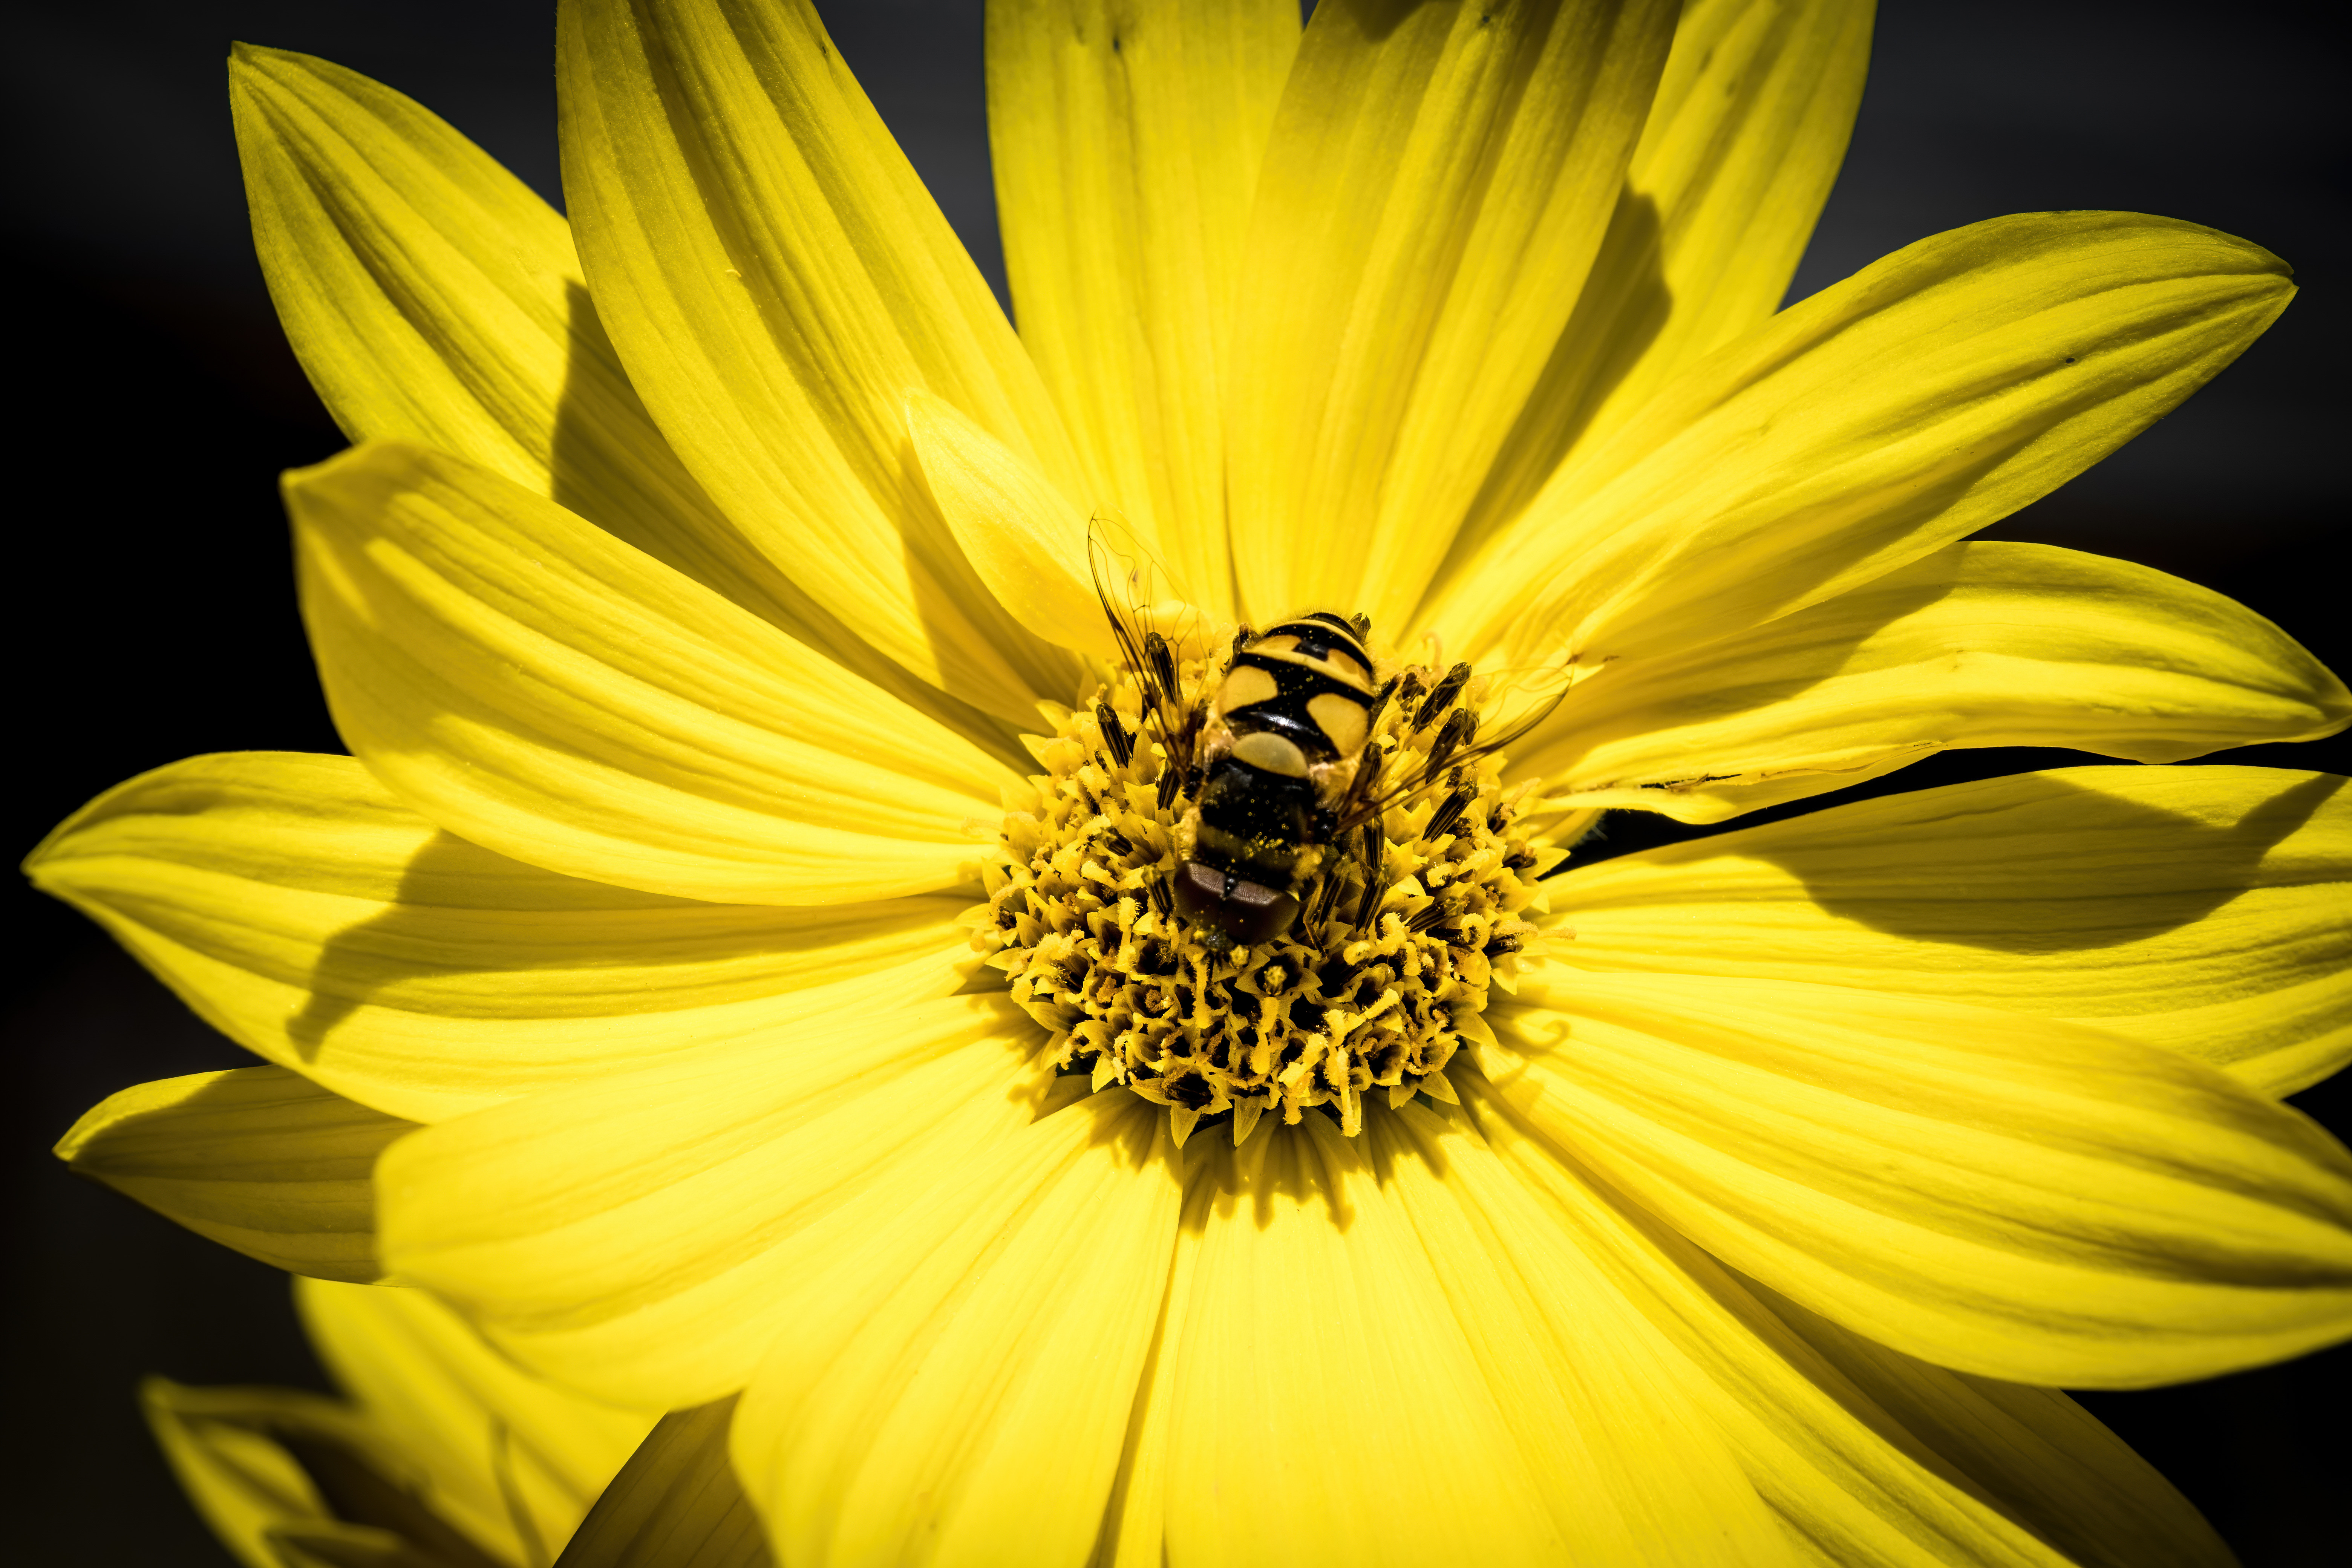 The little floret collects nectar from a yellow flower